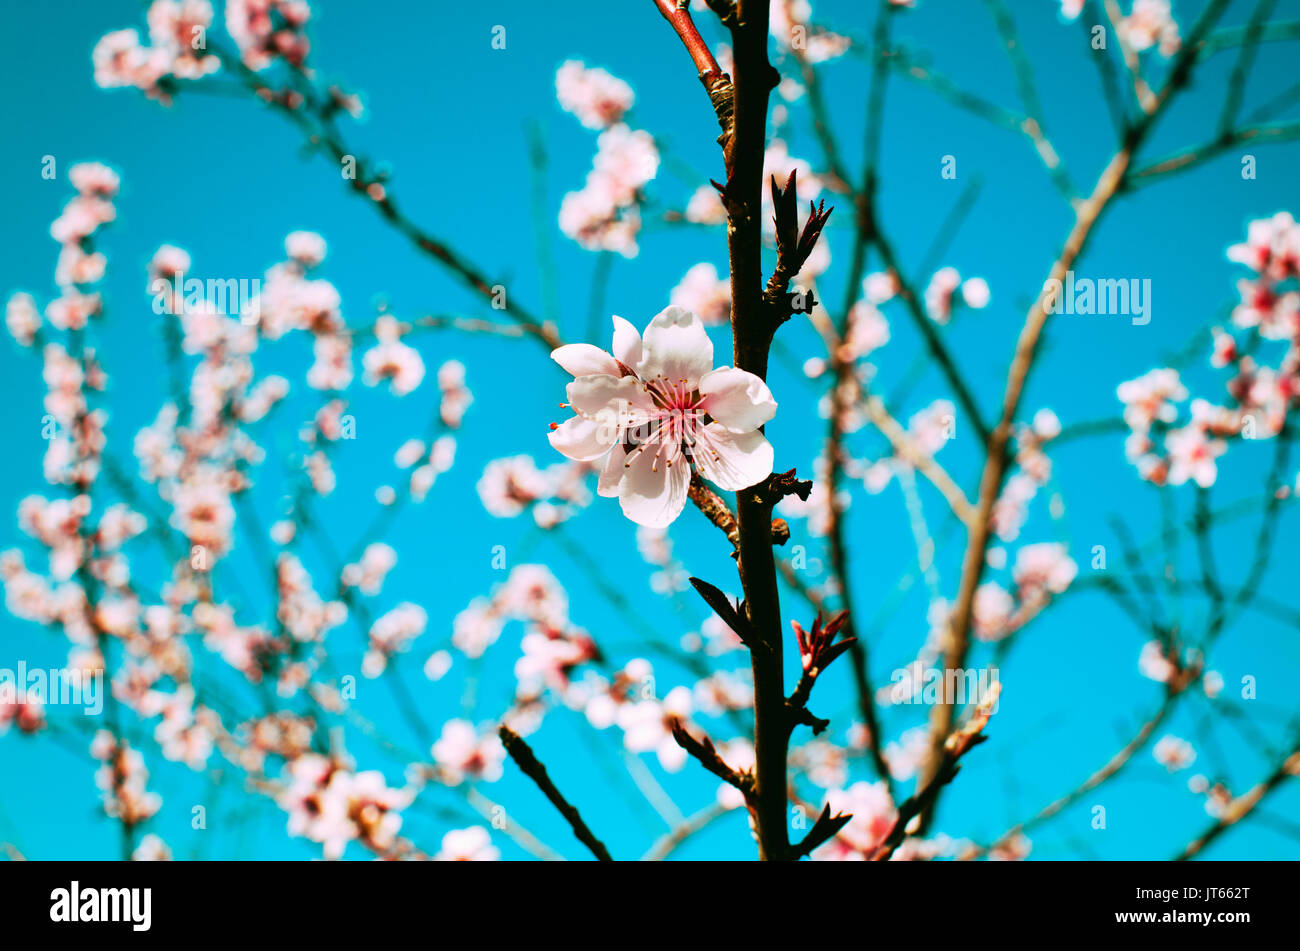 Small pink flower blooms on tree.Showing petals against branches and the turquoise color sky.Tree blooms in the spring are beautiful for horticulture. Stock Photo